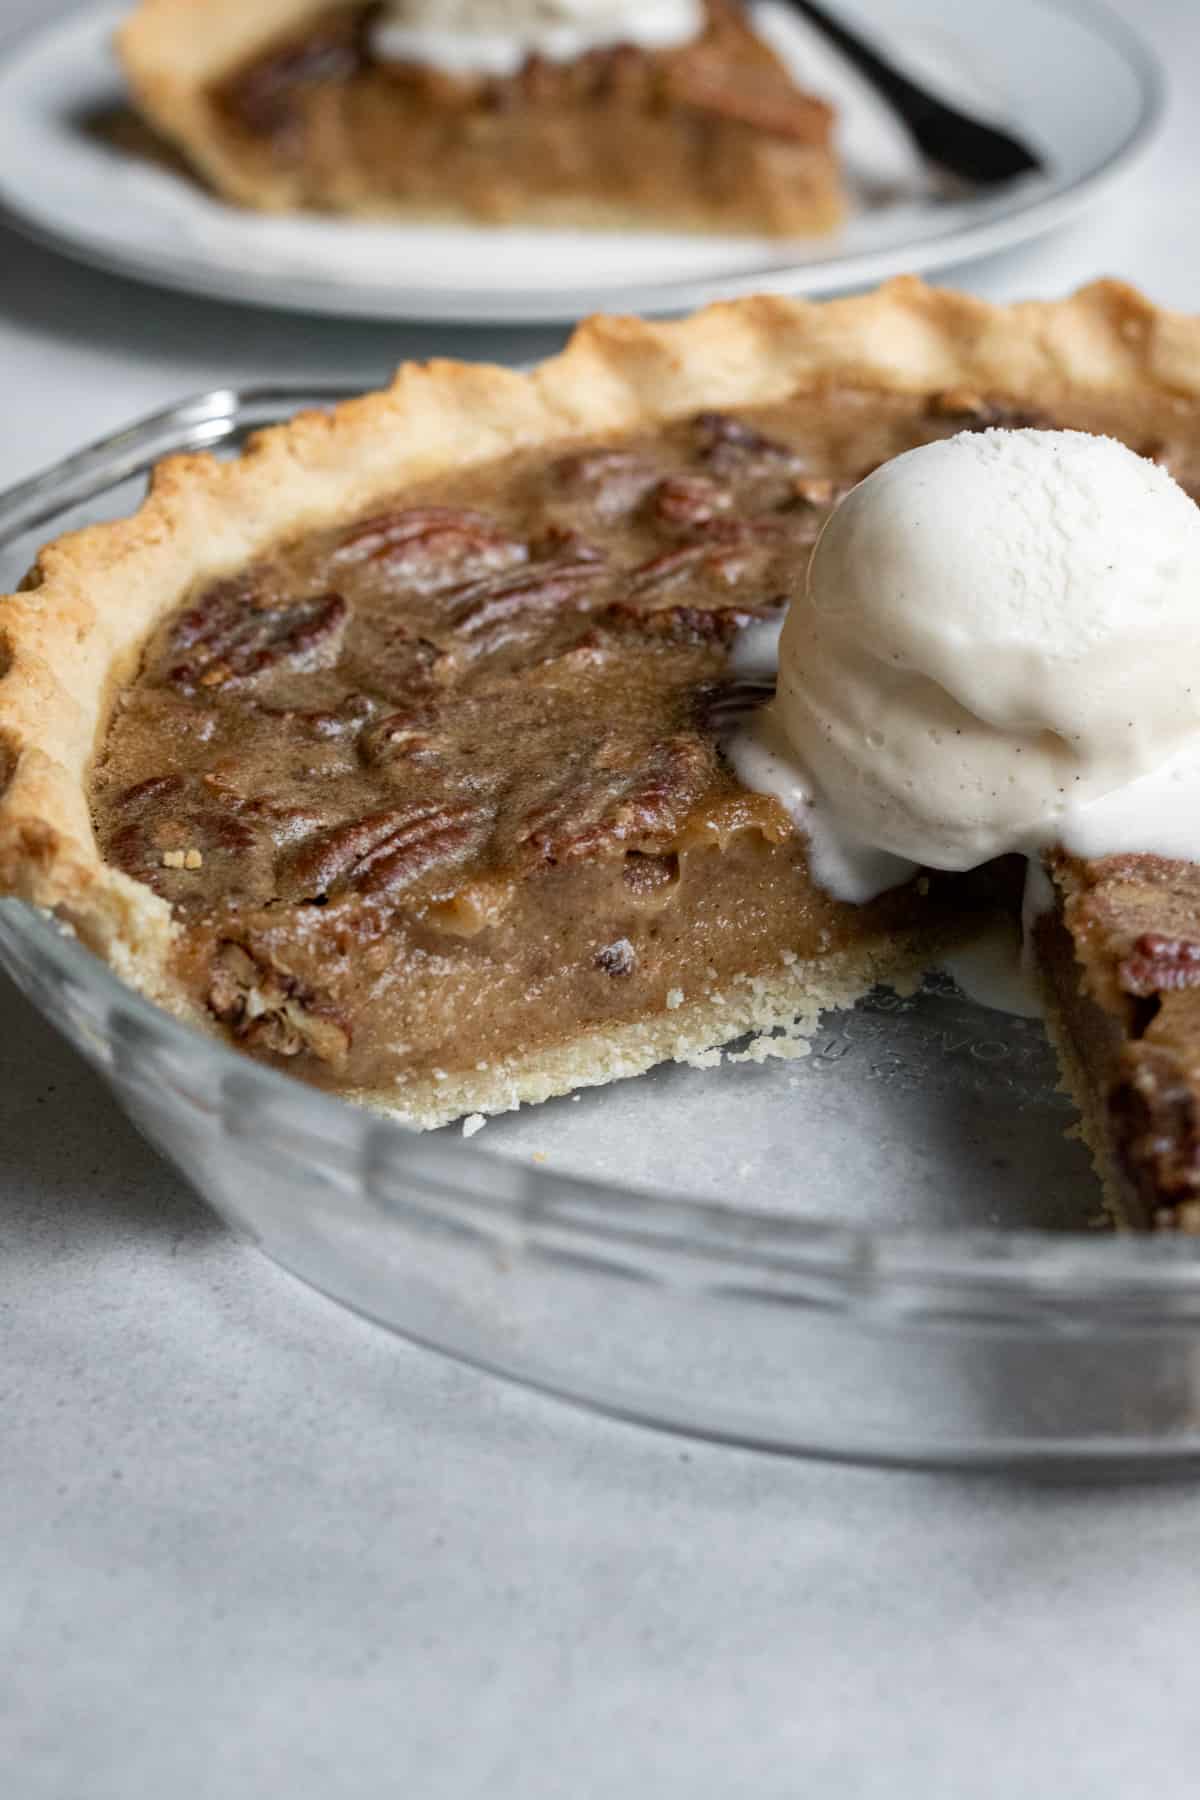 Photo of gluten-free pecan pie showing how the crust looks when baked.